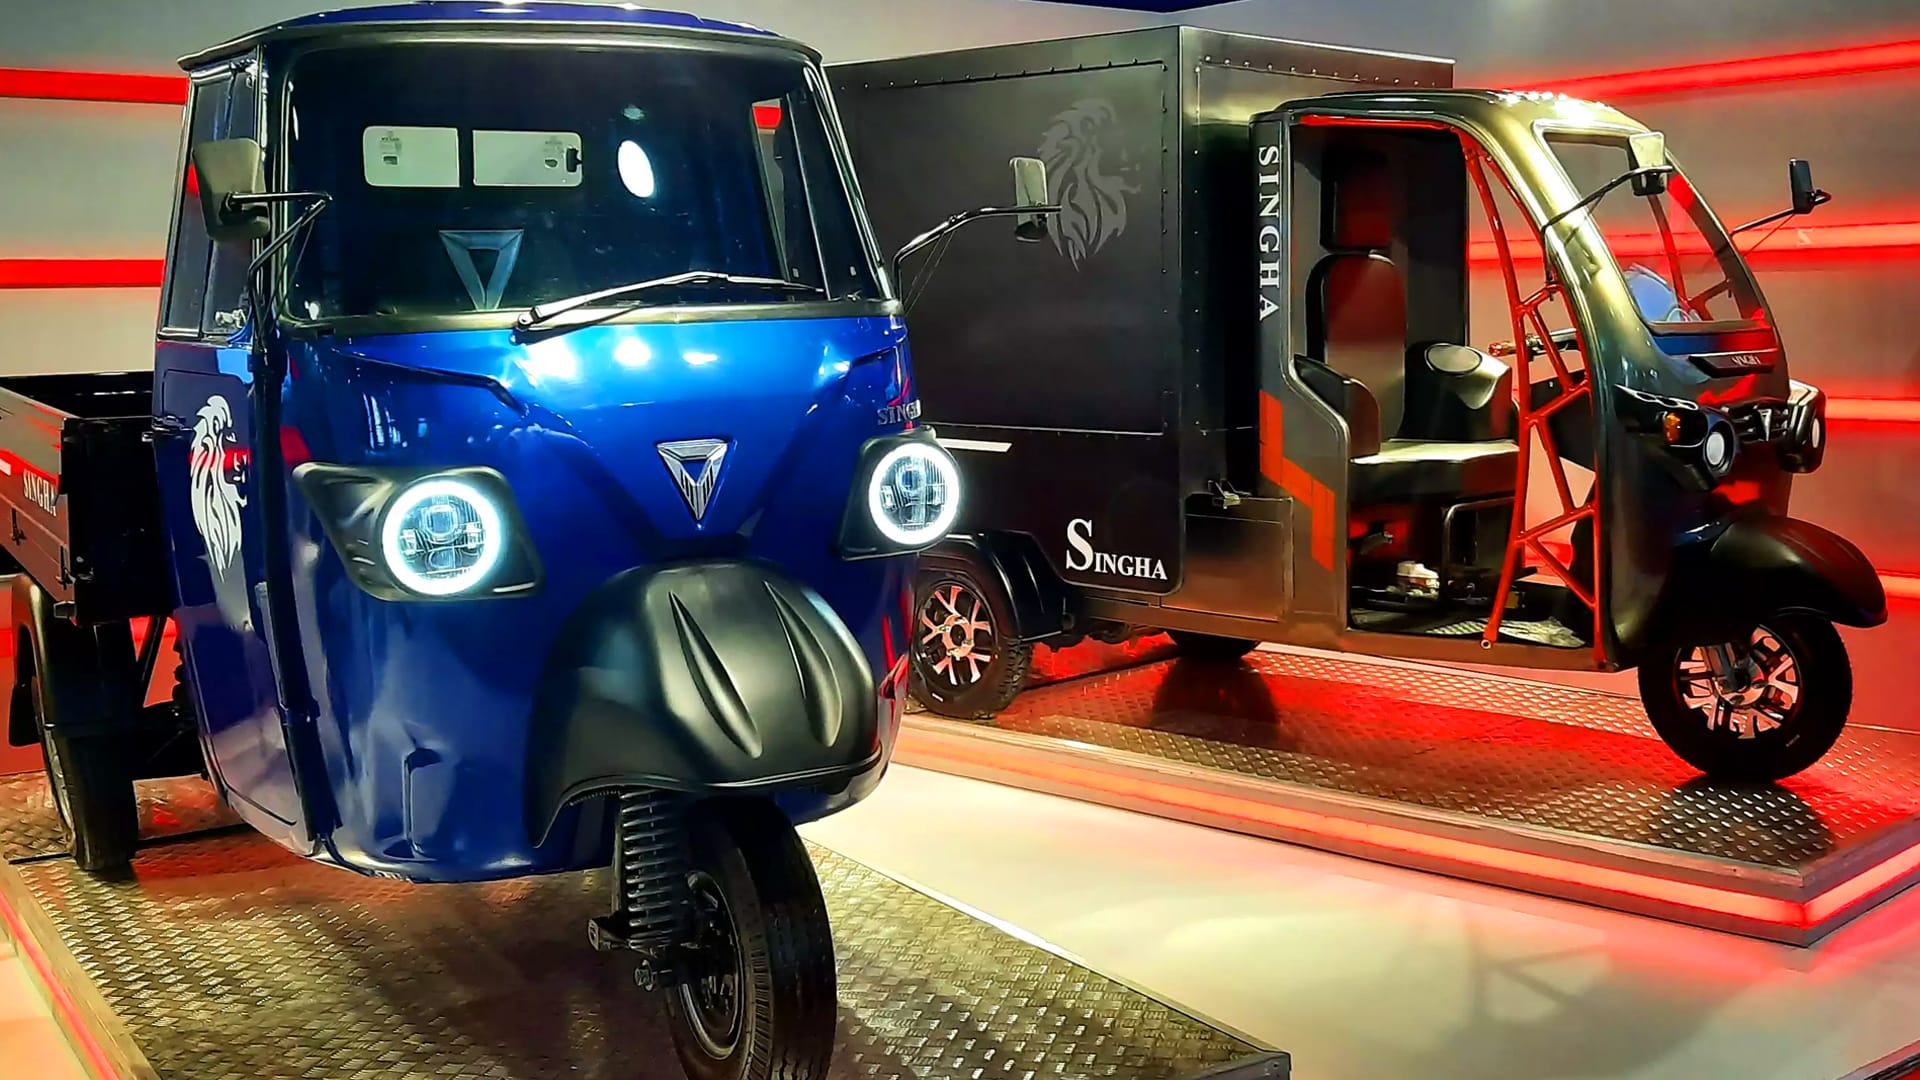 Omega Seiki ties up with CK Motors for electric three-wheeler sales in South India